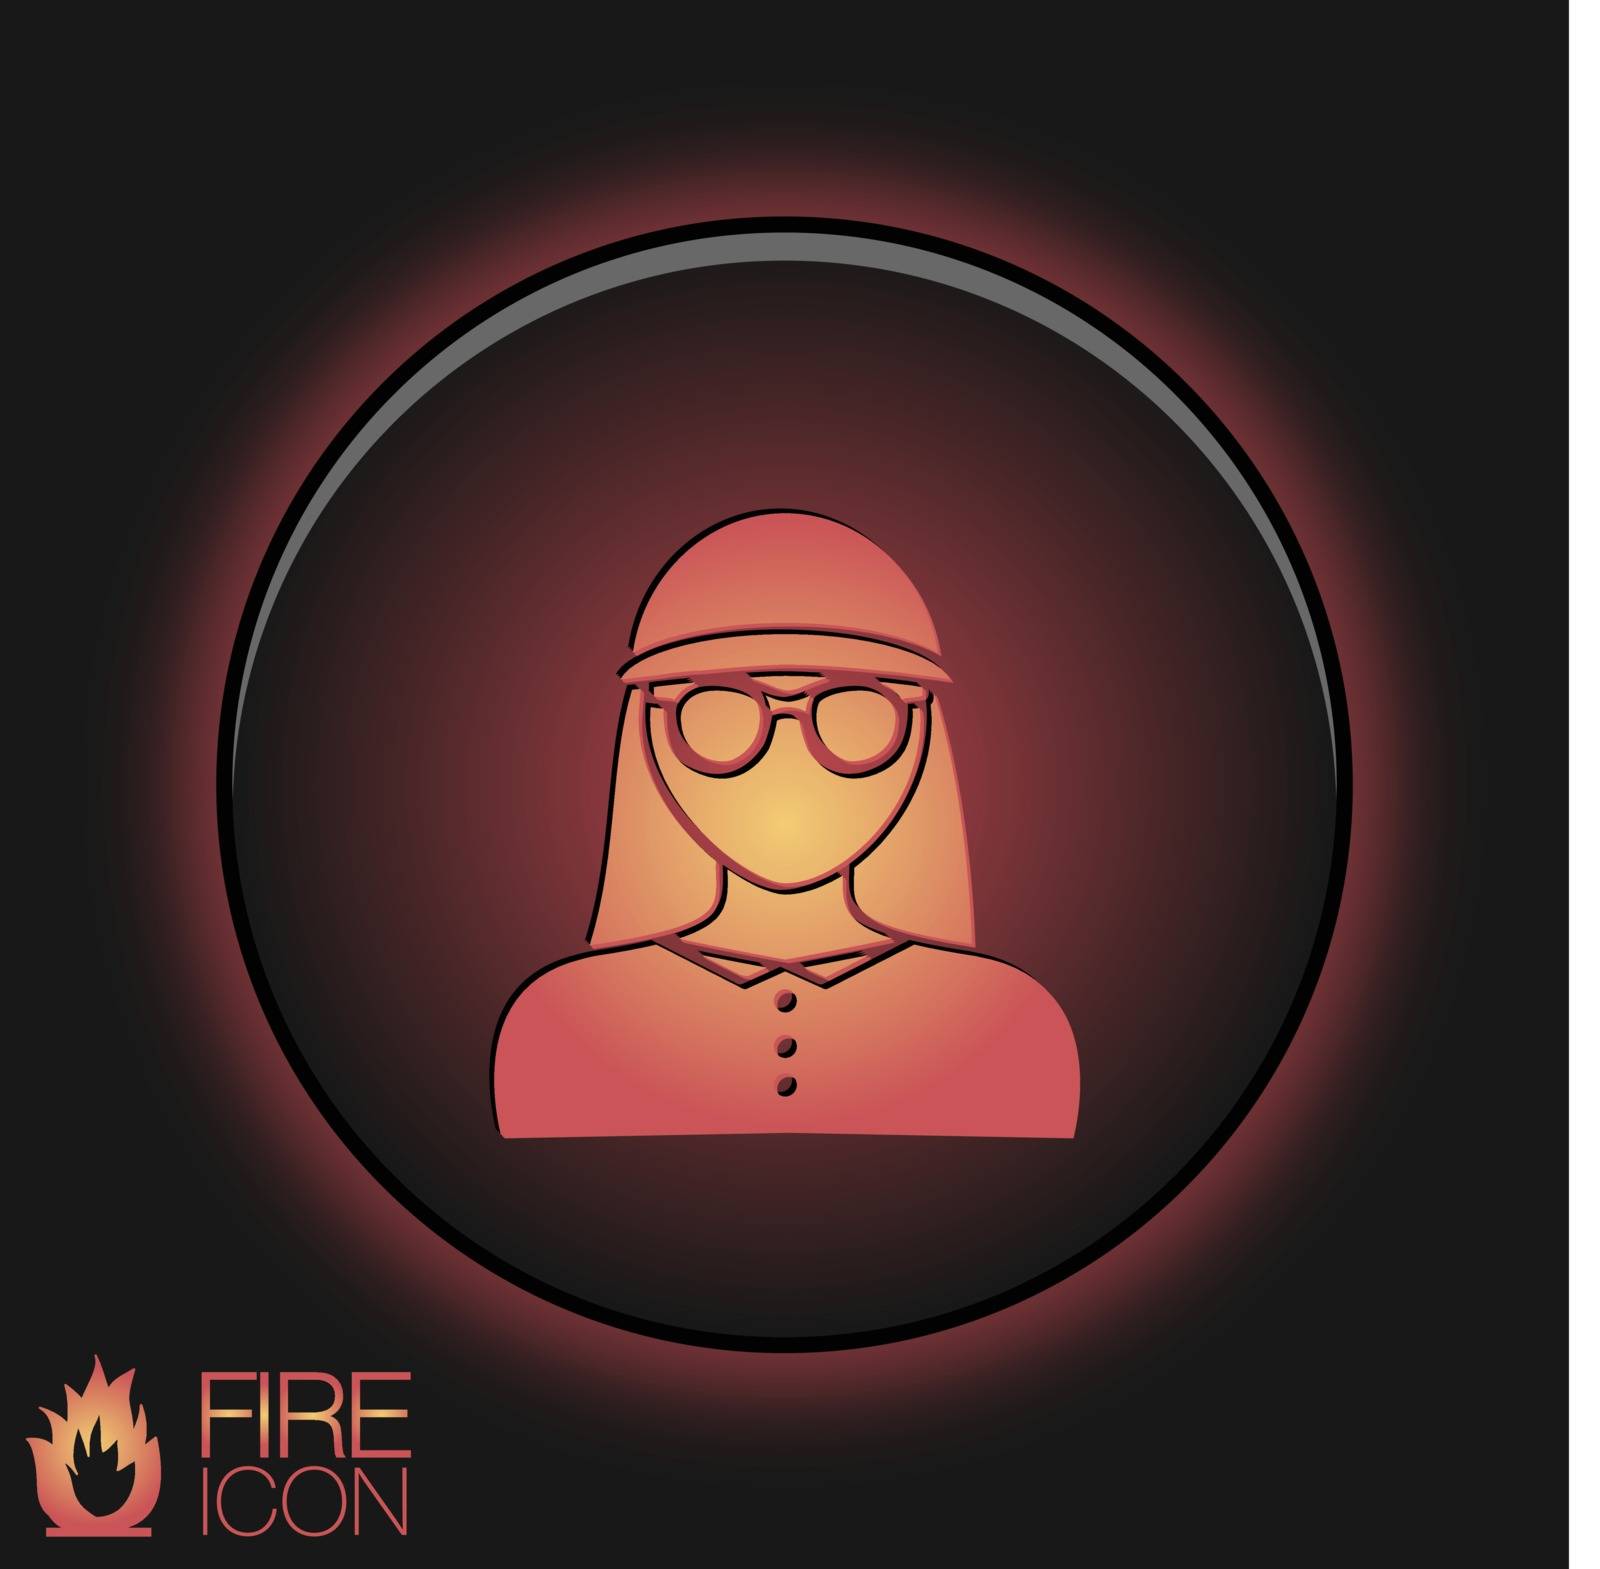 A female avatar. Avatar of a woman. Round icon image girl in glasses and a hat by LittleCuckoo